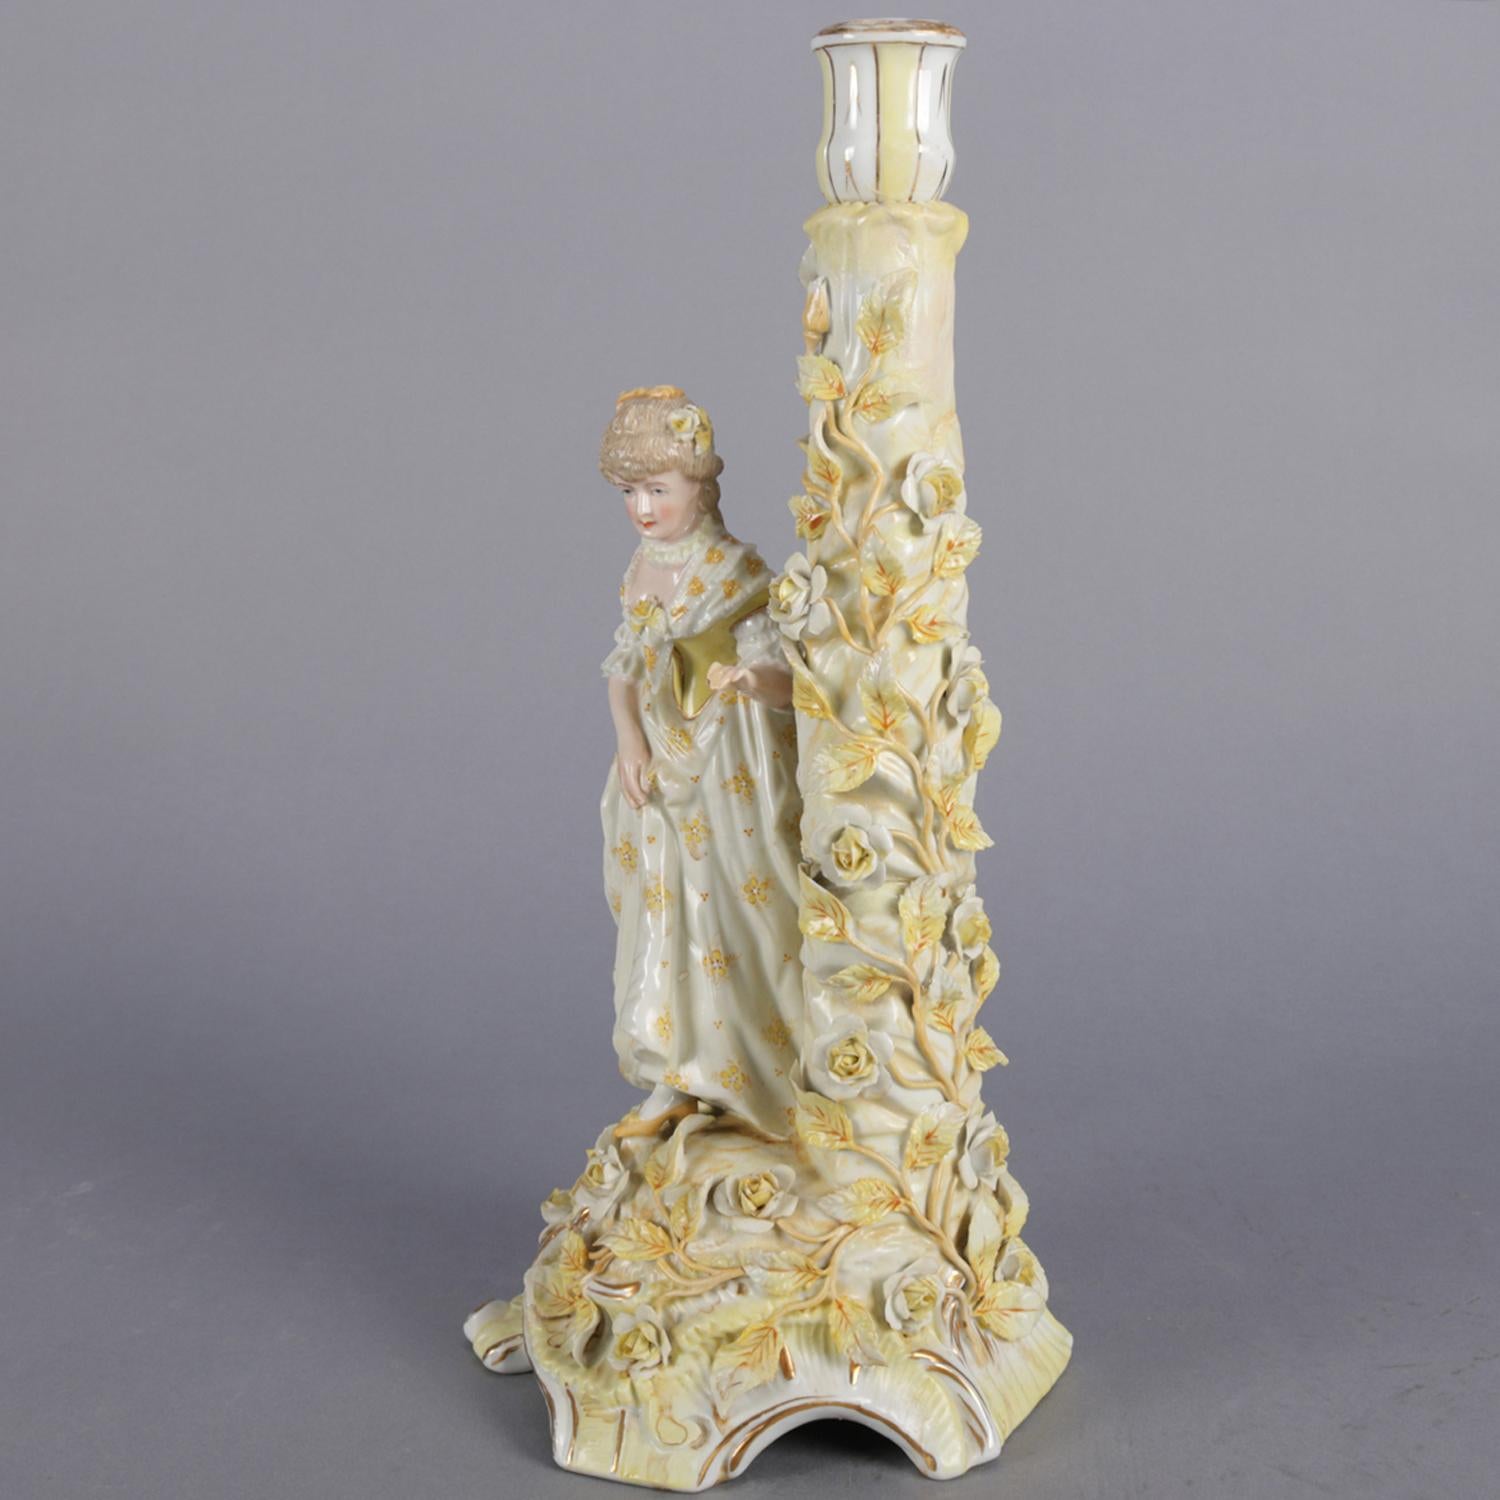 Antique Meissen porcelain figural candlestick features hand painted and gilt maiden in garden setting with candle stick having applied foliate and ivy decoration, 